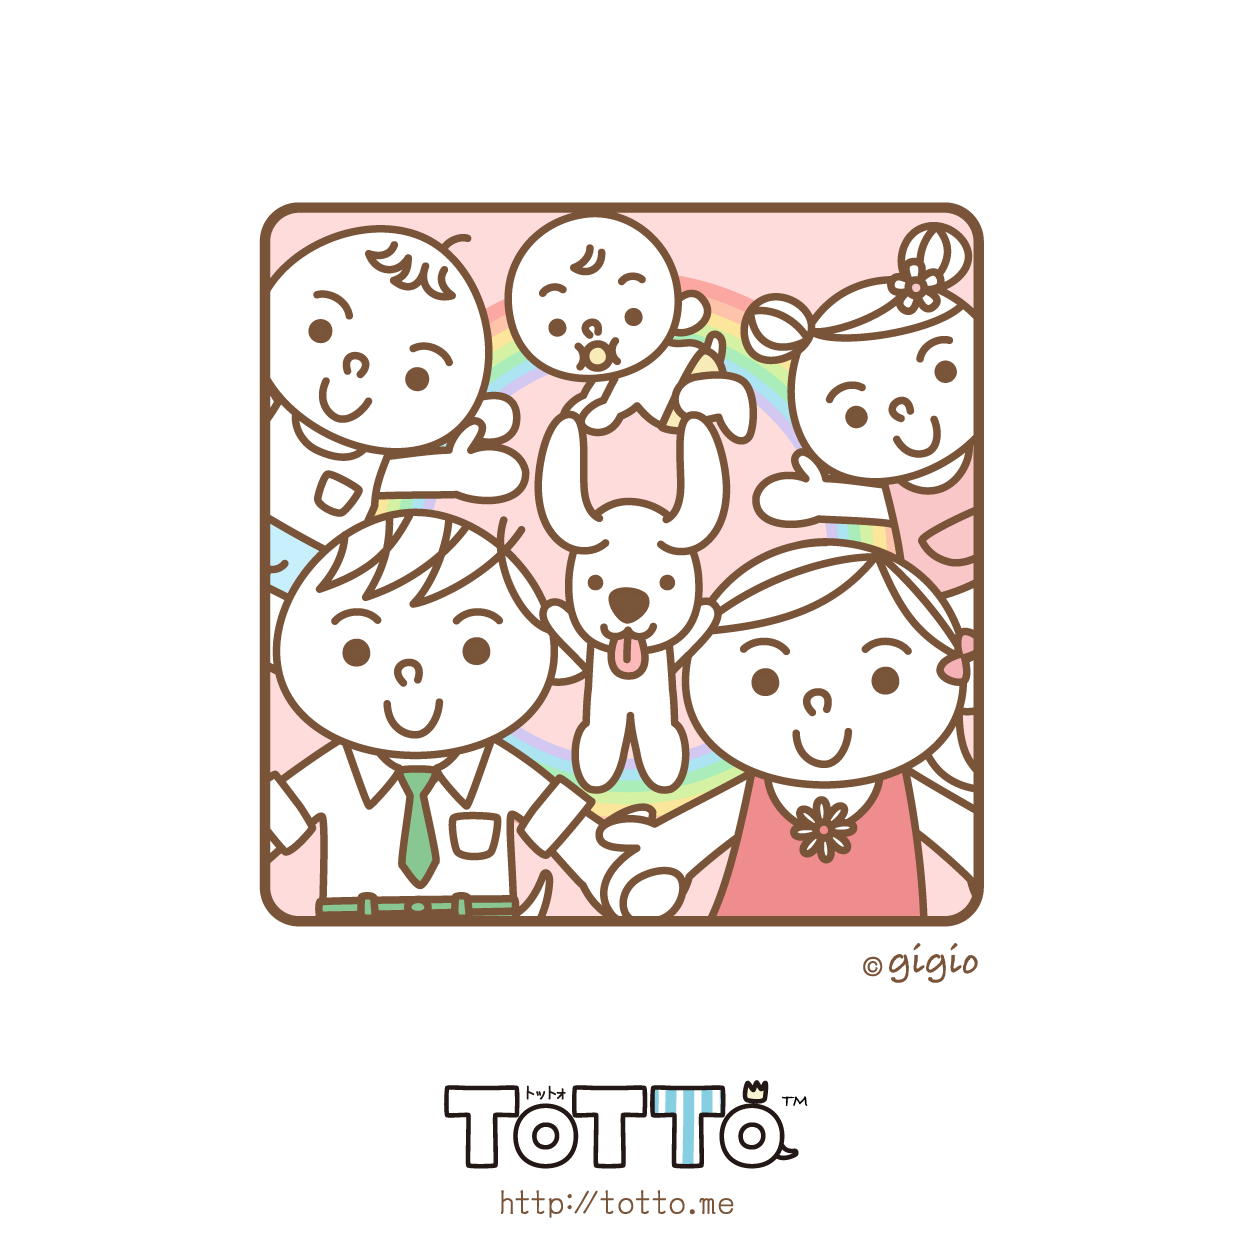 Family & Dog – Adult TOTTO Ver.